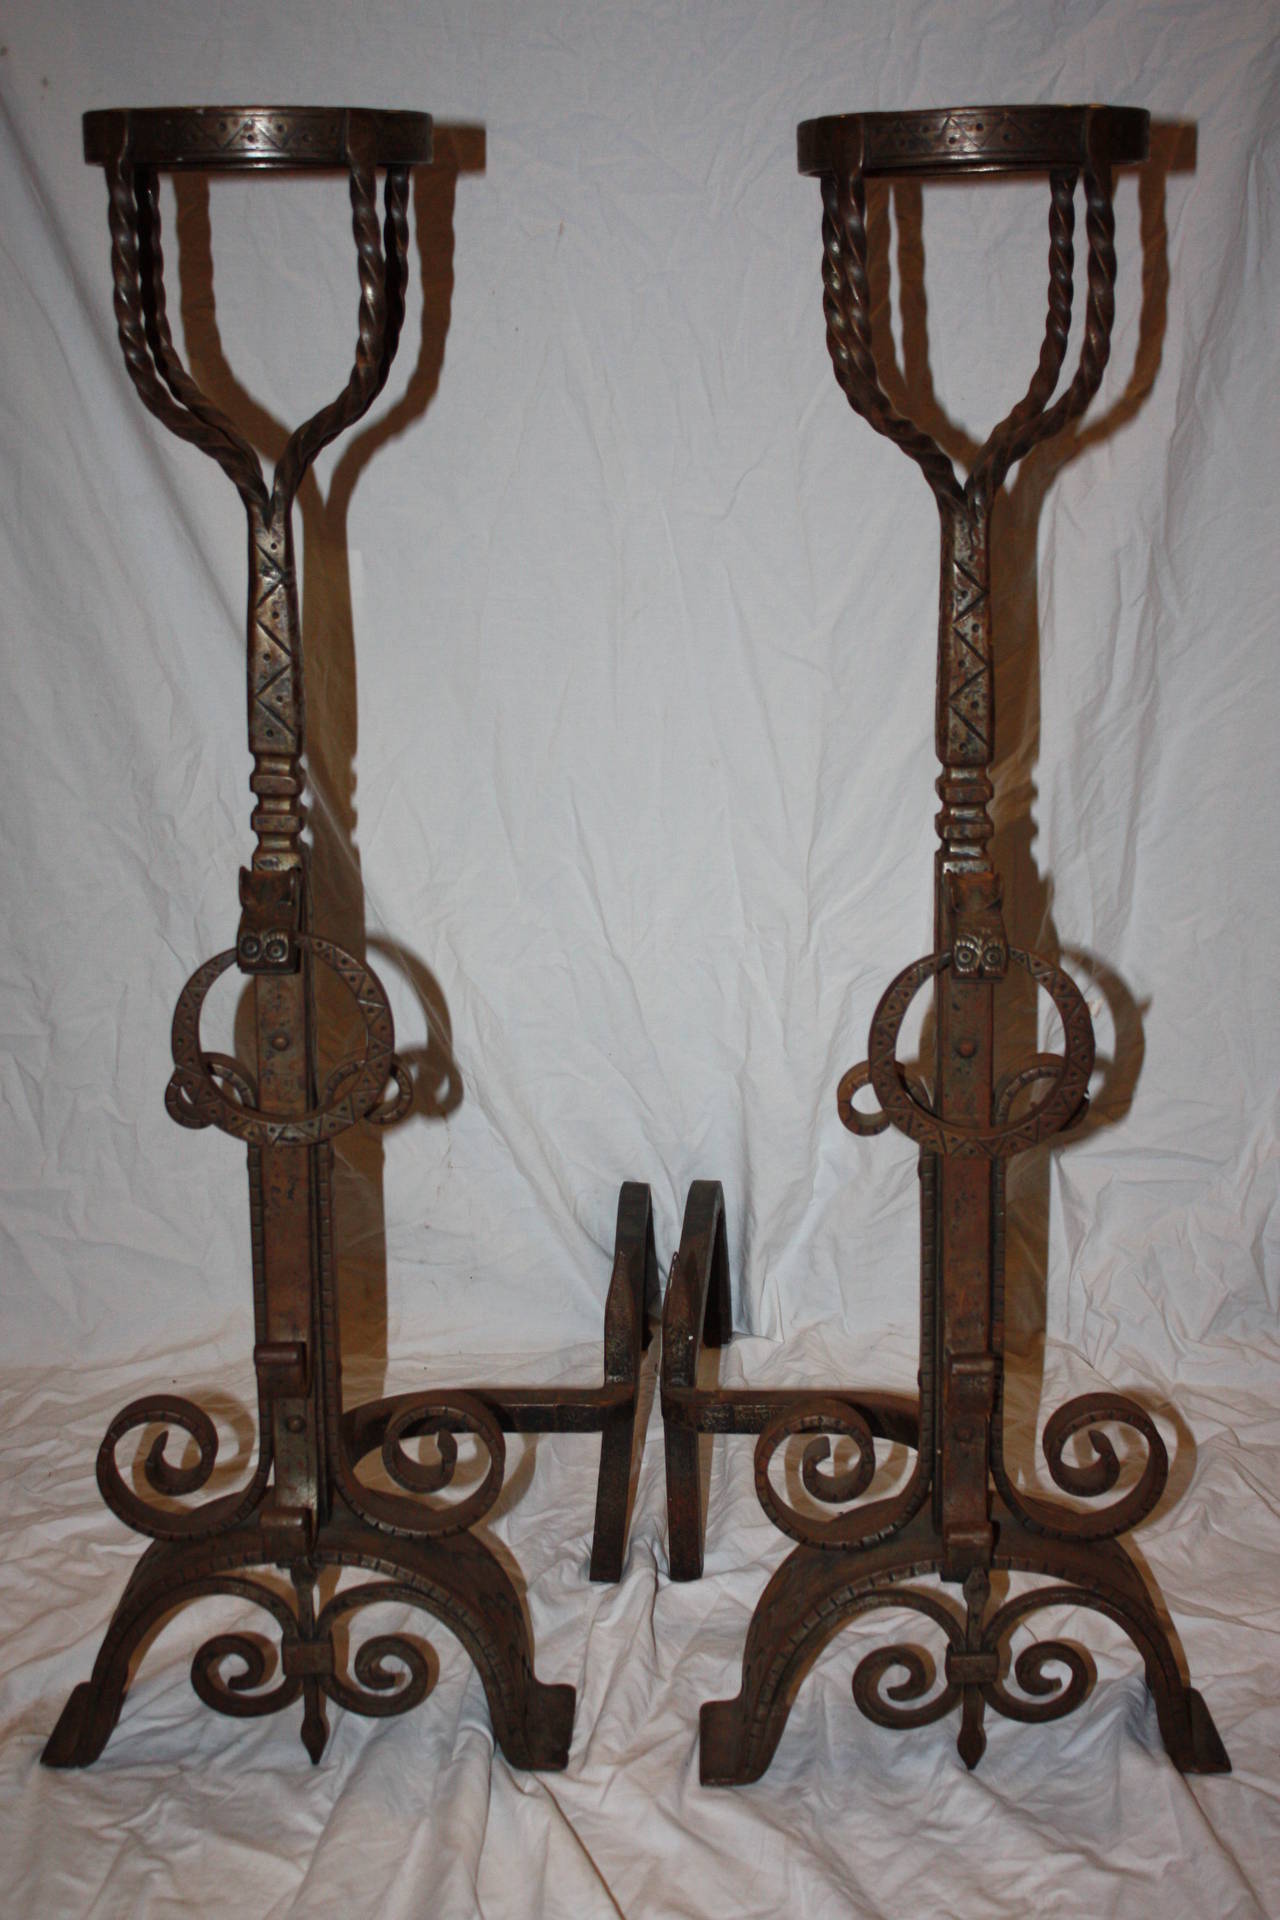 This is a really nice pair of wrought iron andirons I purchased in France.  They are accompanied by a pair of matching fire tools that hang nicely from the top of the andirons.   The andirons are very large in size.  The iron work is exceptional,